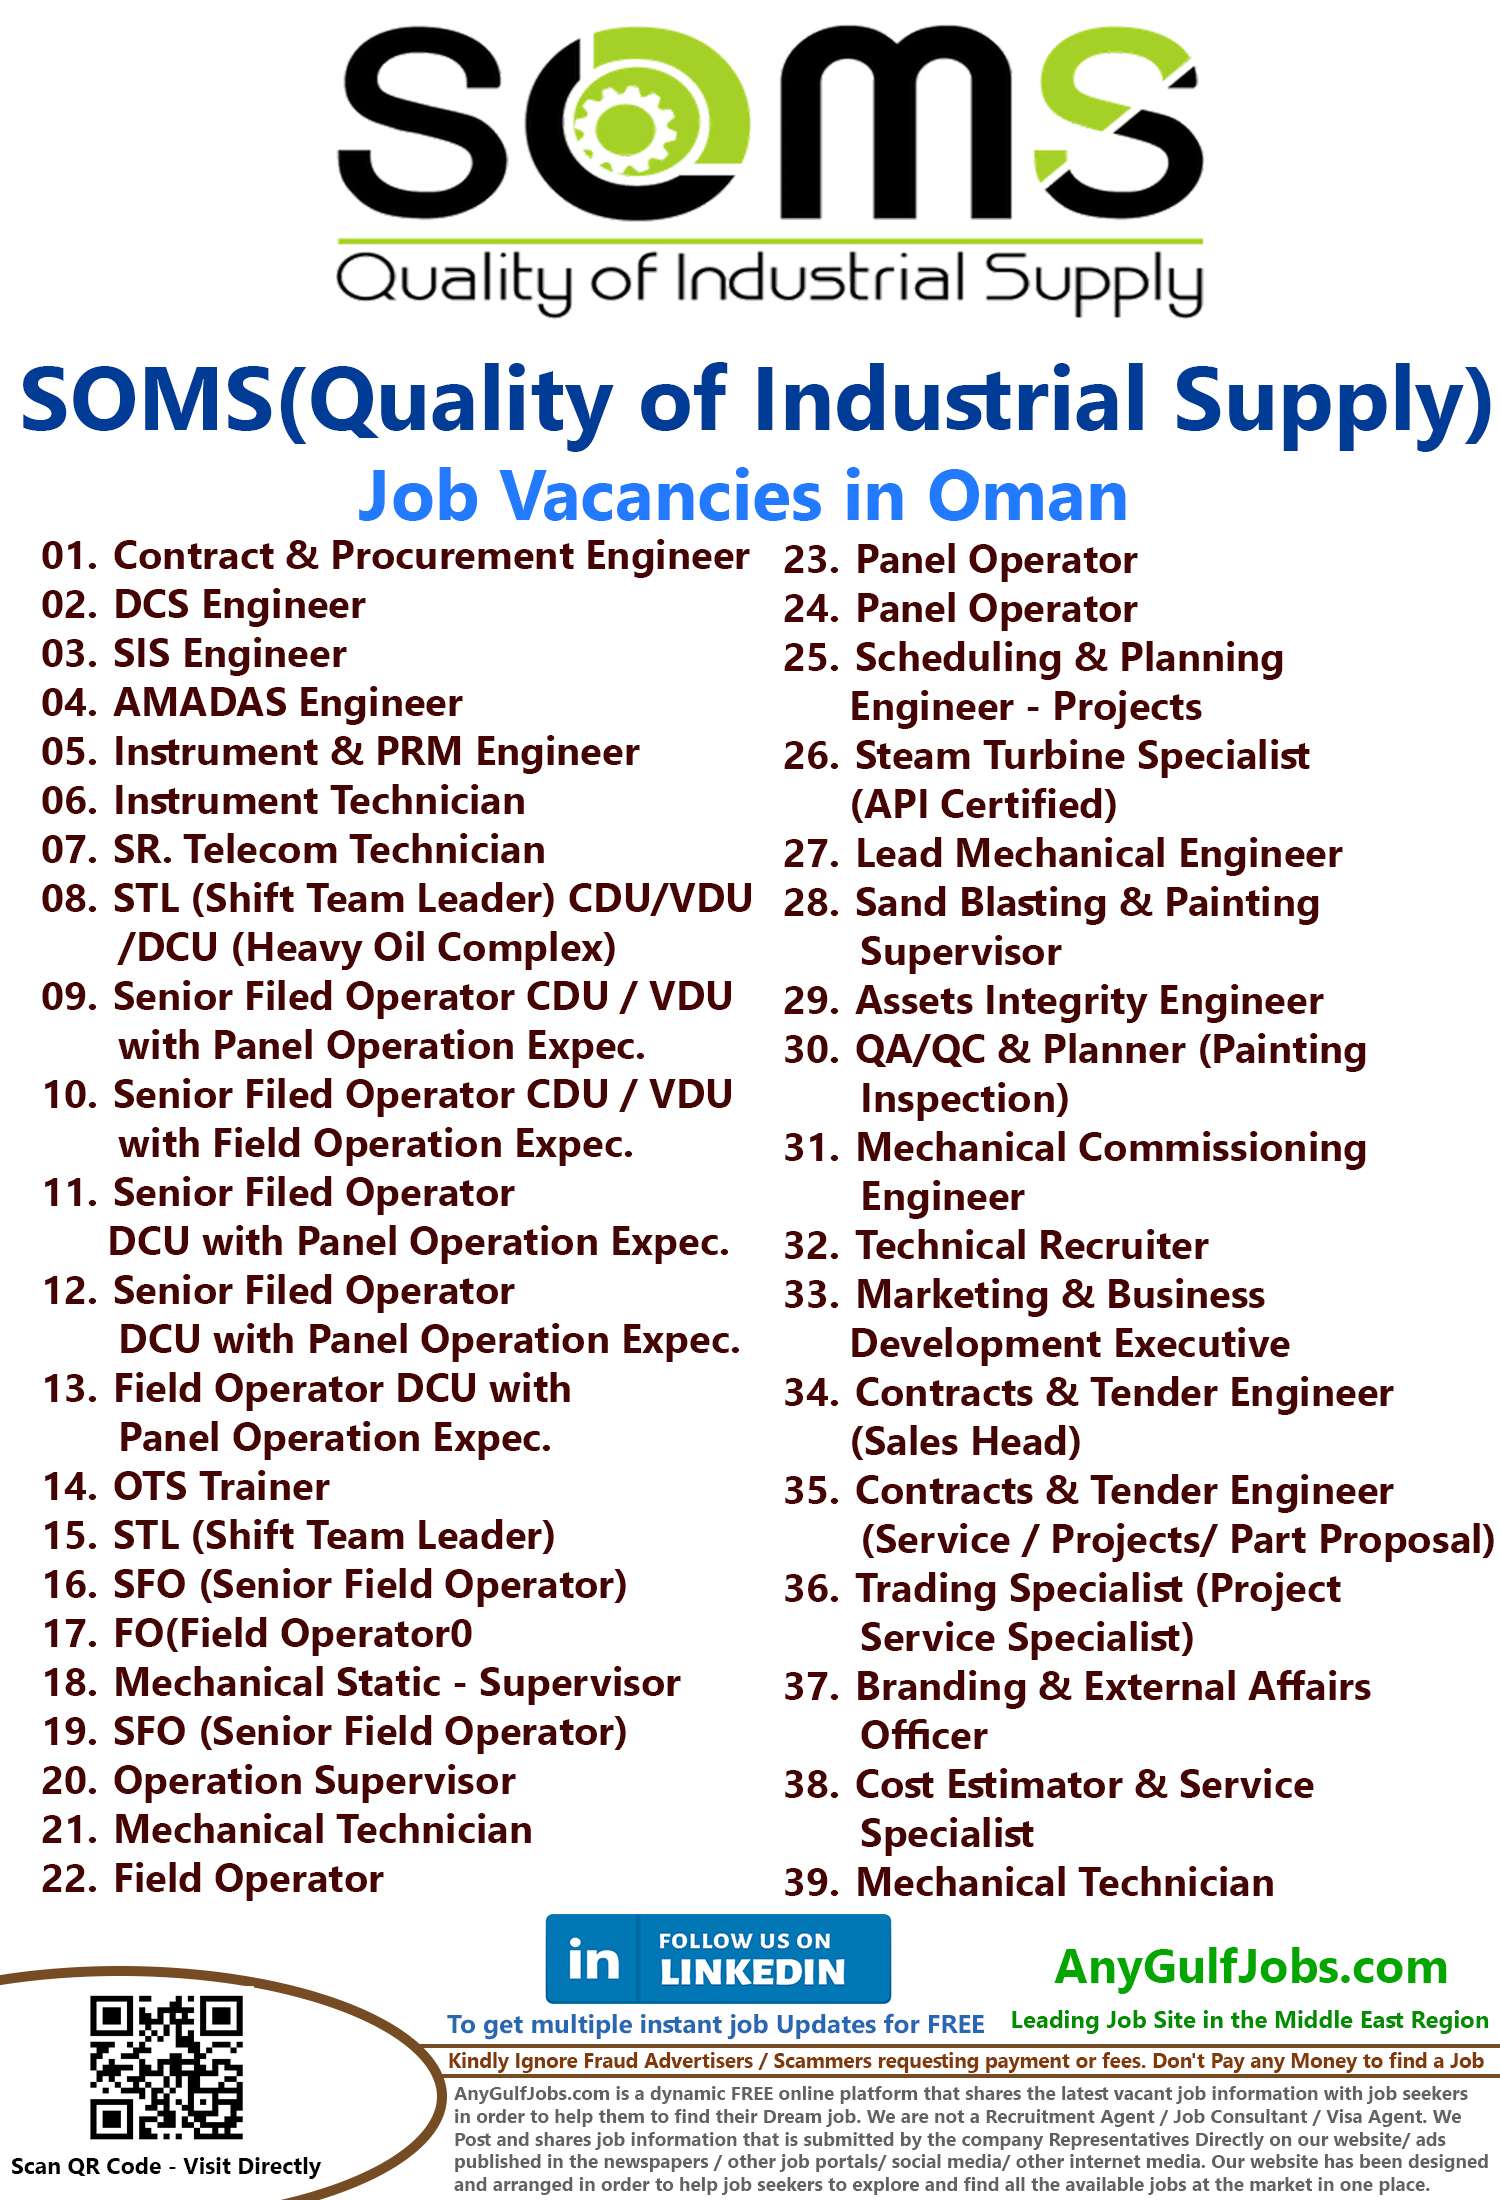 List of SOMS(Quality of Industrial Supply) Jobs - Oman